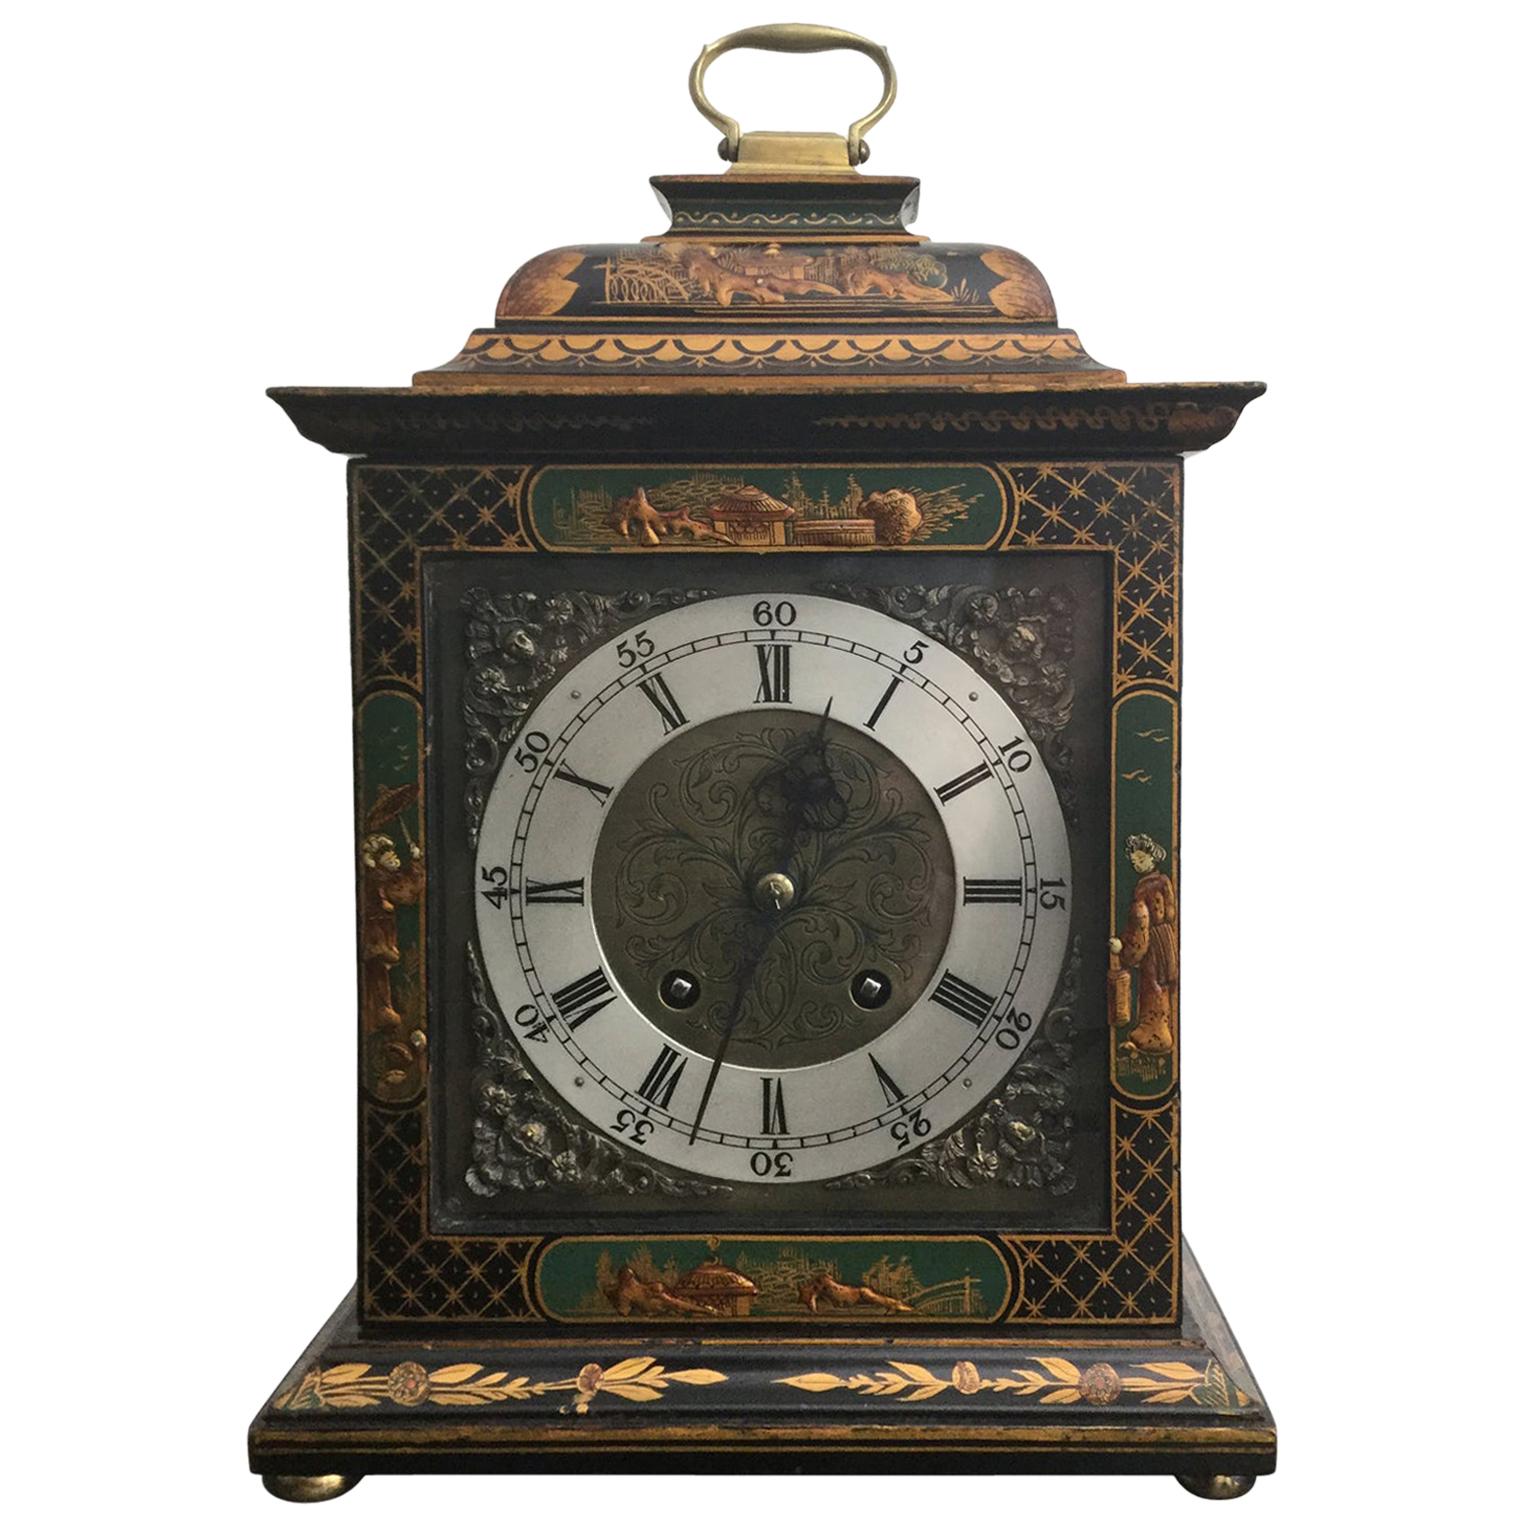 Green Chinoiserie Georgian Style Mantel Clock by English Maker Astral